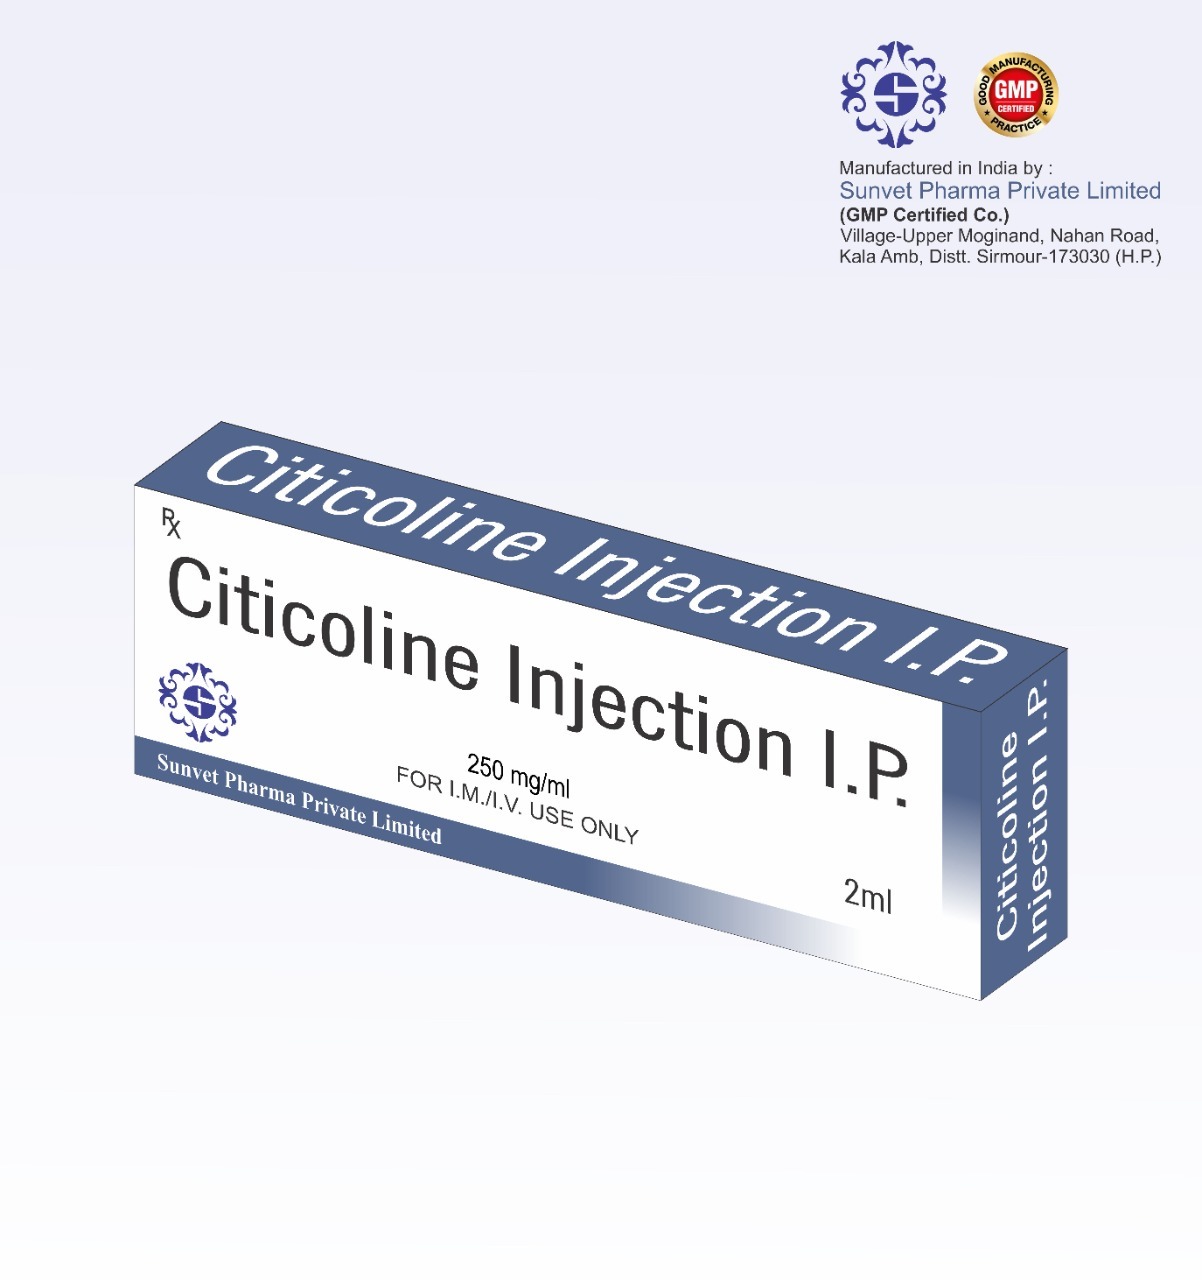 ONDANSETRON INJECTION IN THIRD PARTY MANUFACTURING